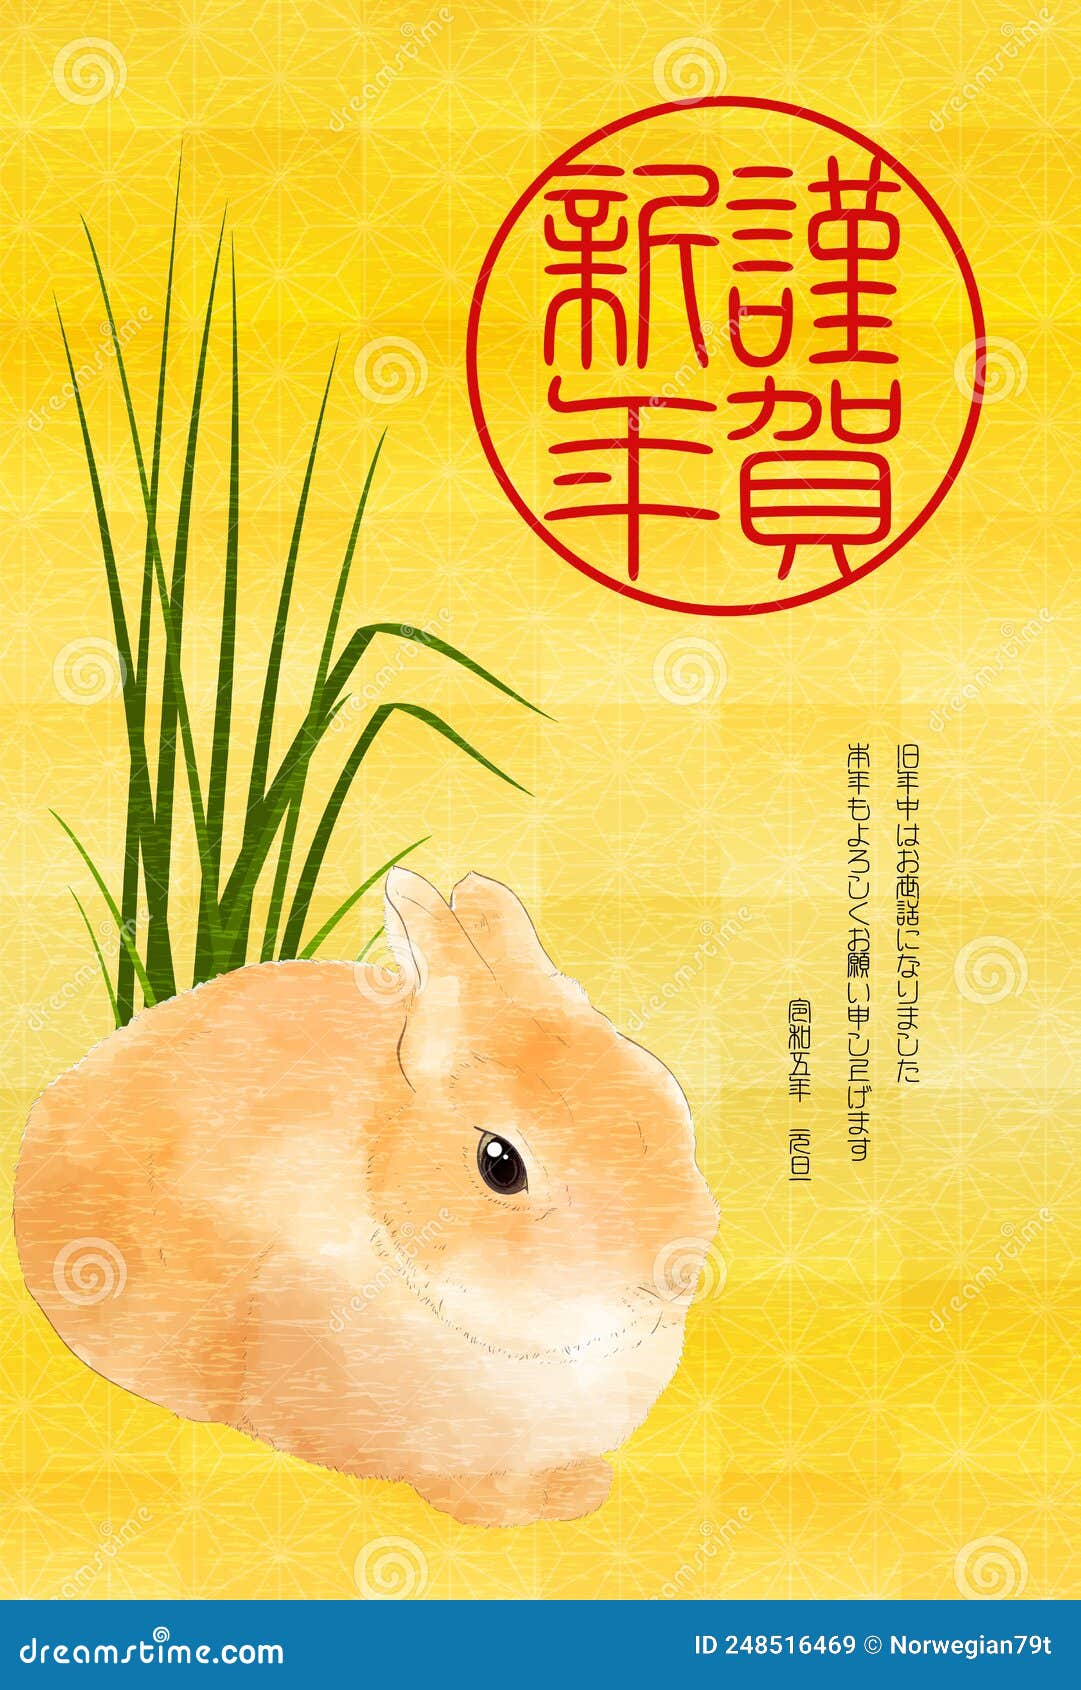 2023 Chinese New Year Rabbit Watercolor Japanese New Year